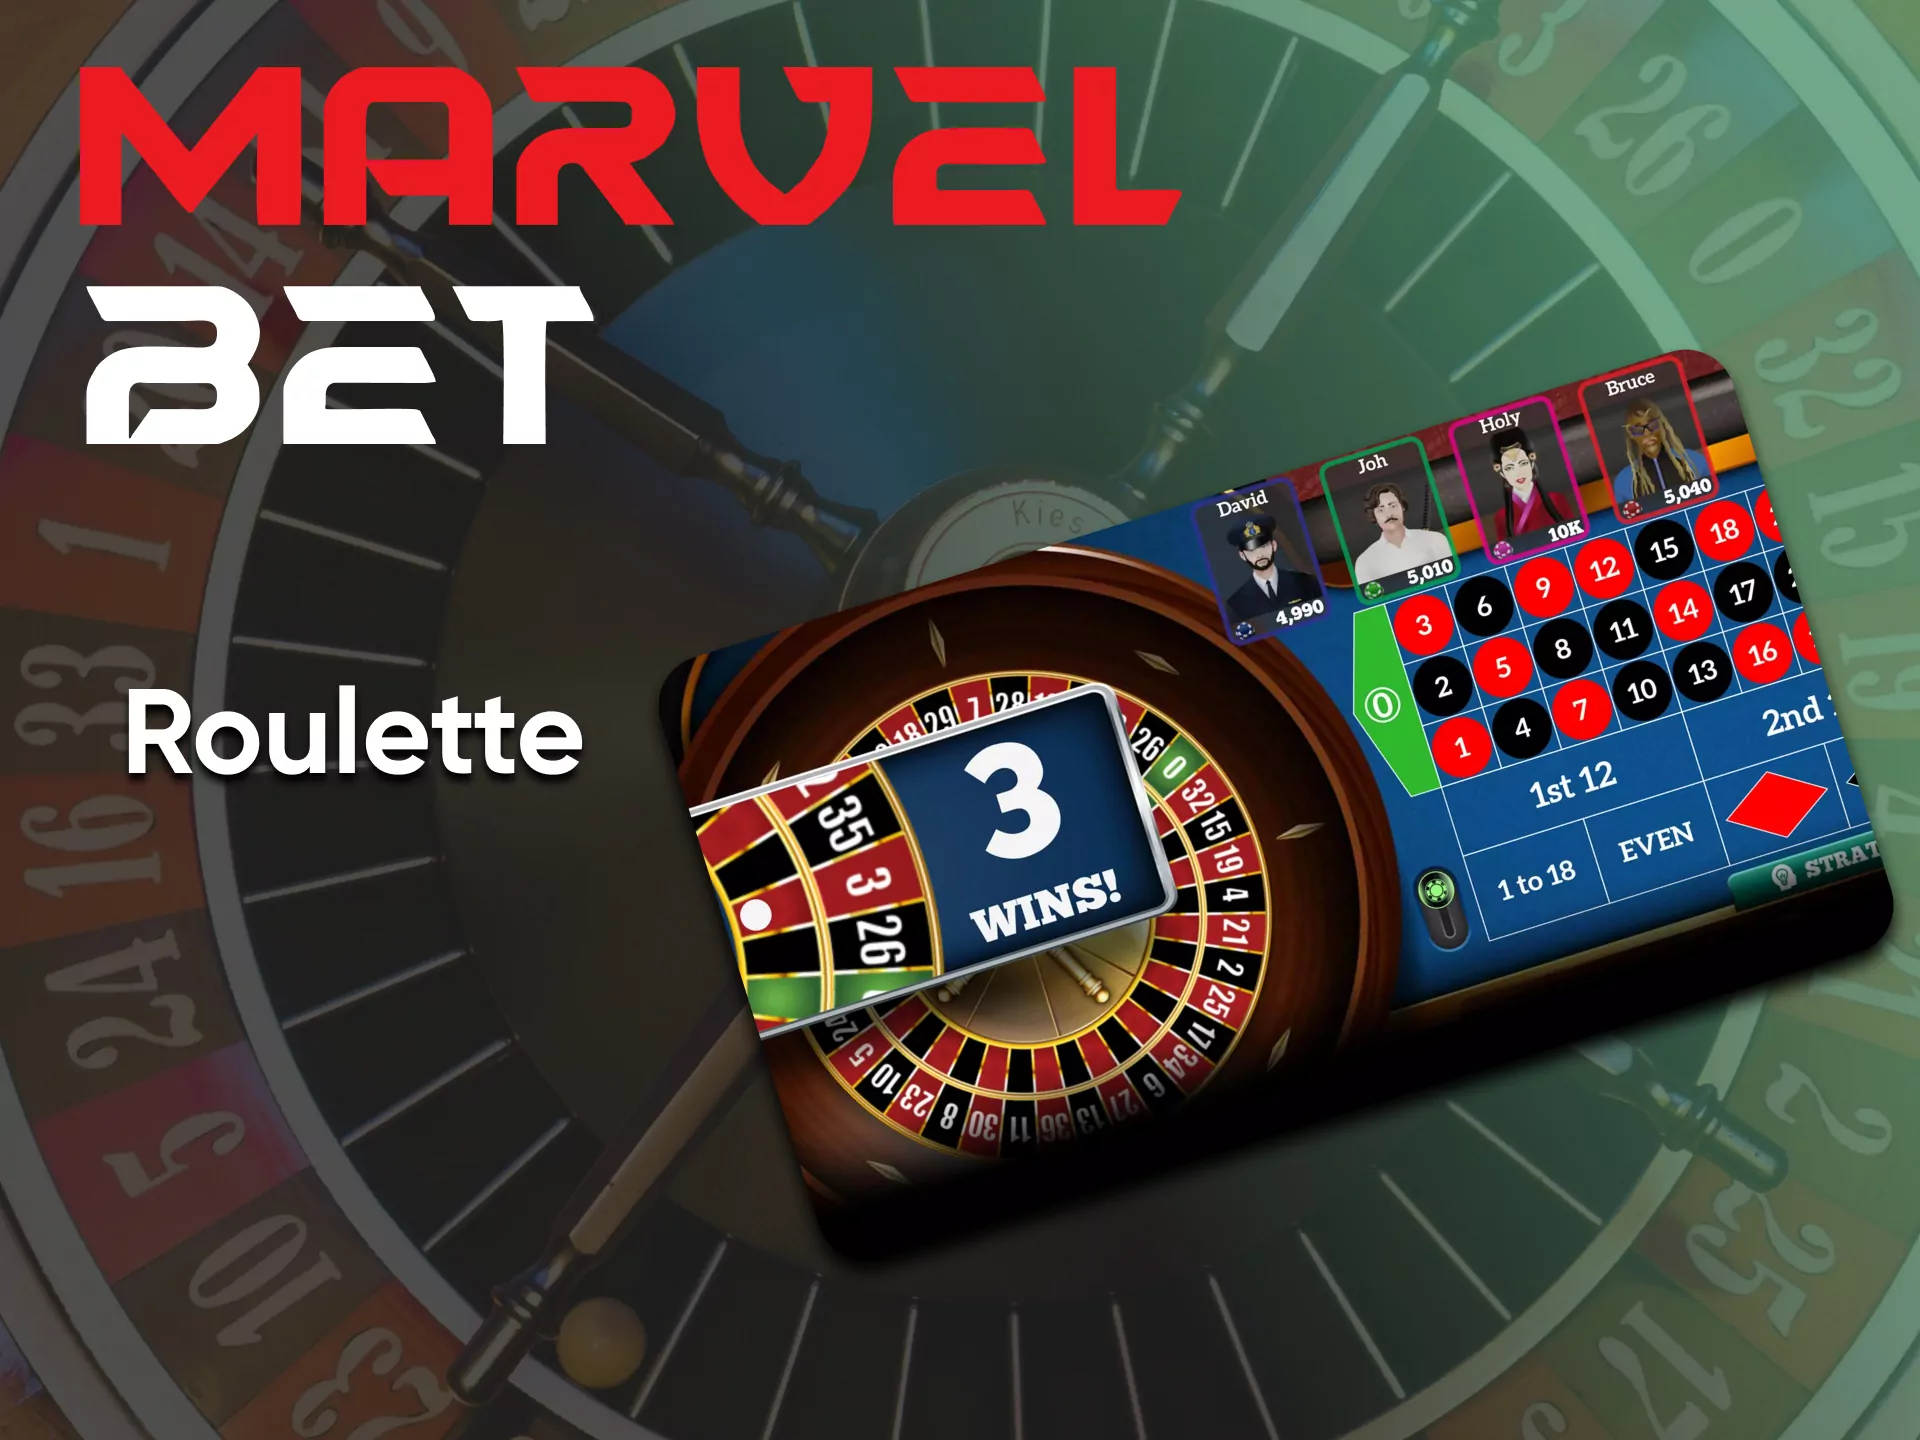 To play roulette on Marvelbet, find a game in Online Casino.